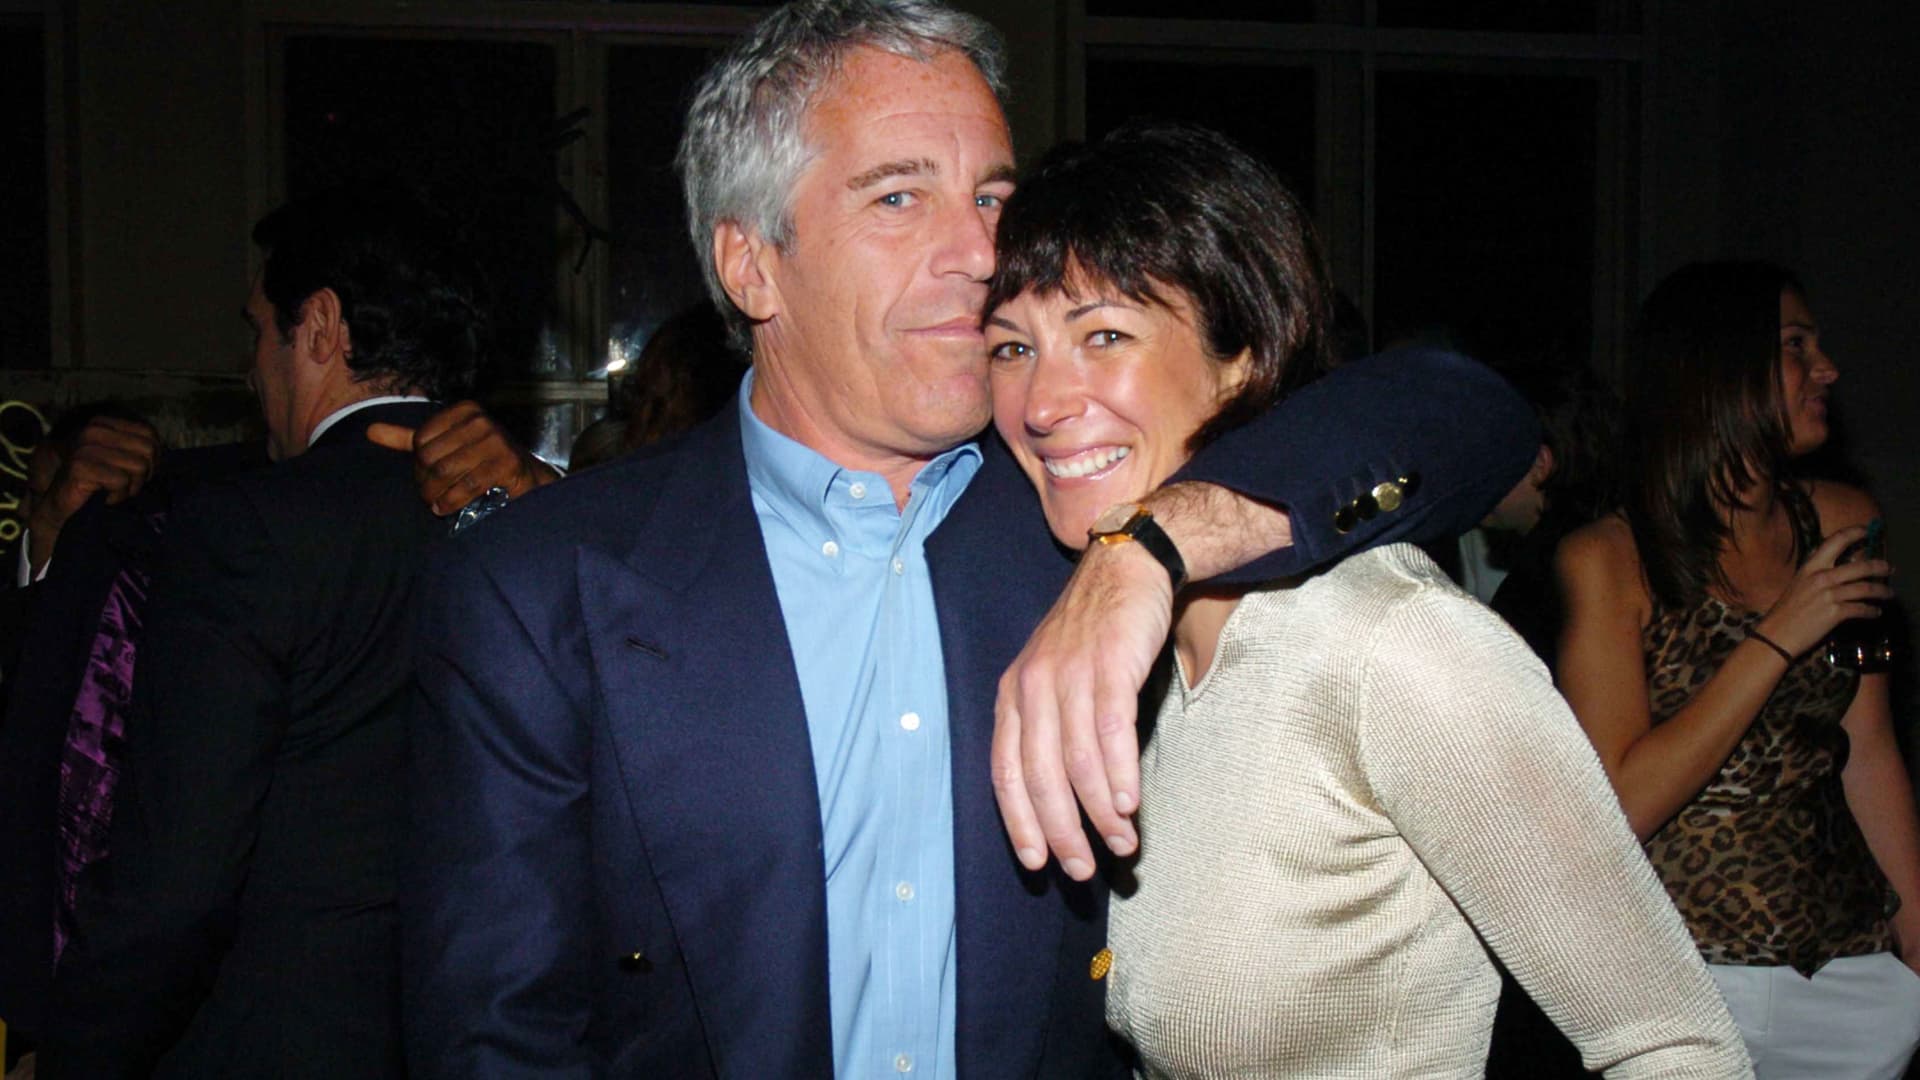 Jeffrey Epstein and Ghislaine Maxwell attend de Grisogono Sponsors The 2005 Wall Street Concert Series Benefiting Wall Street Rising, with a Performance by Rod Stewart, at Cipriani Wall Street in New York City on March 15, 2005.